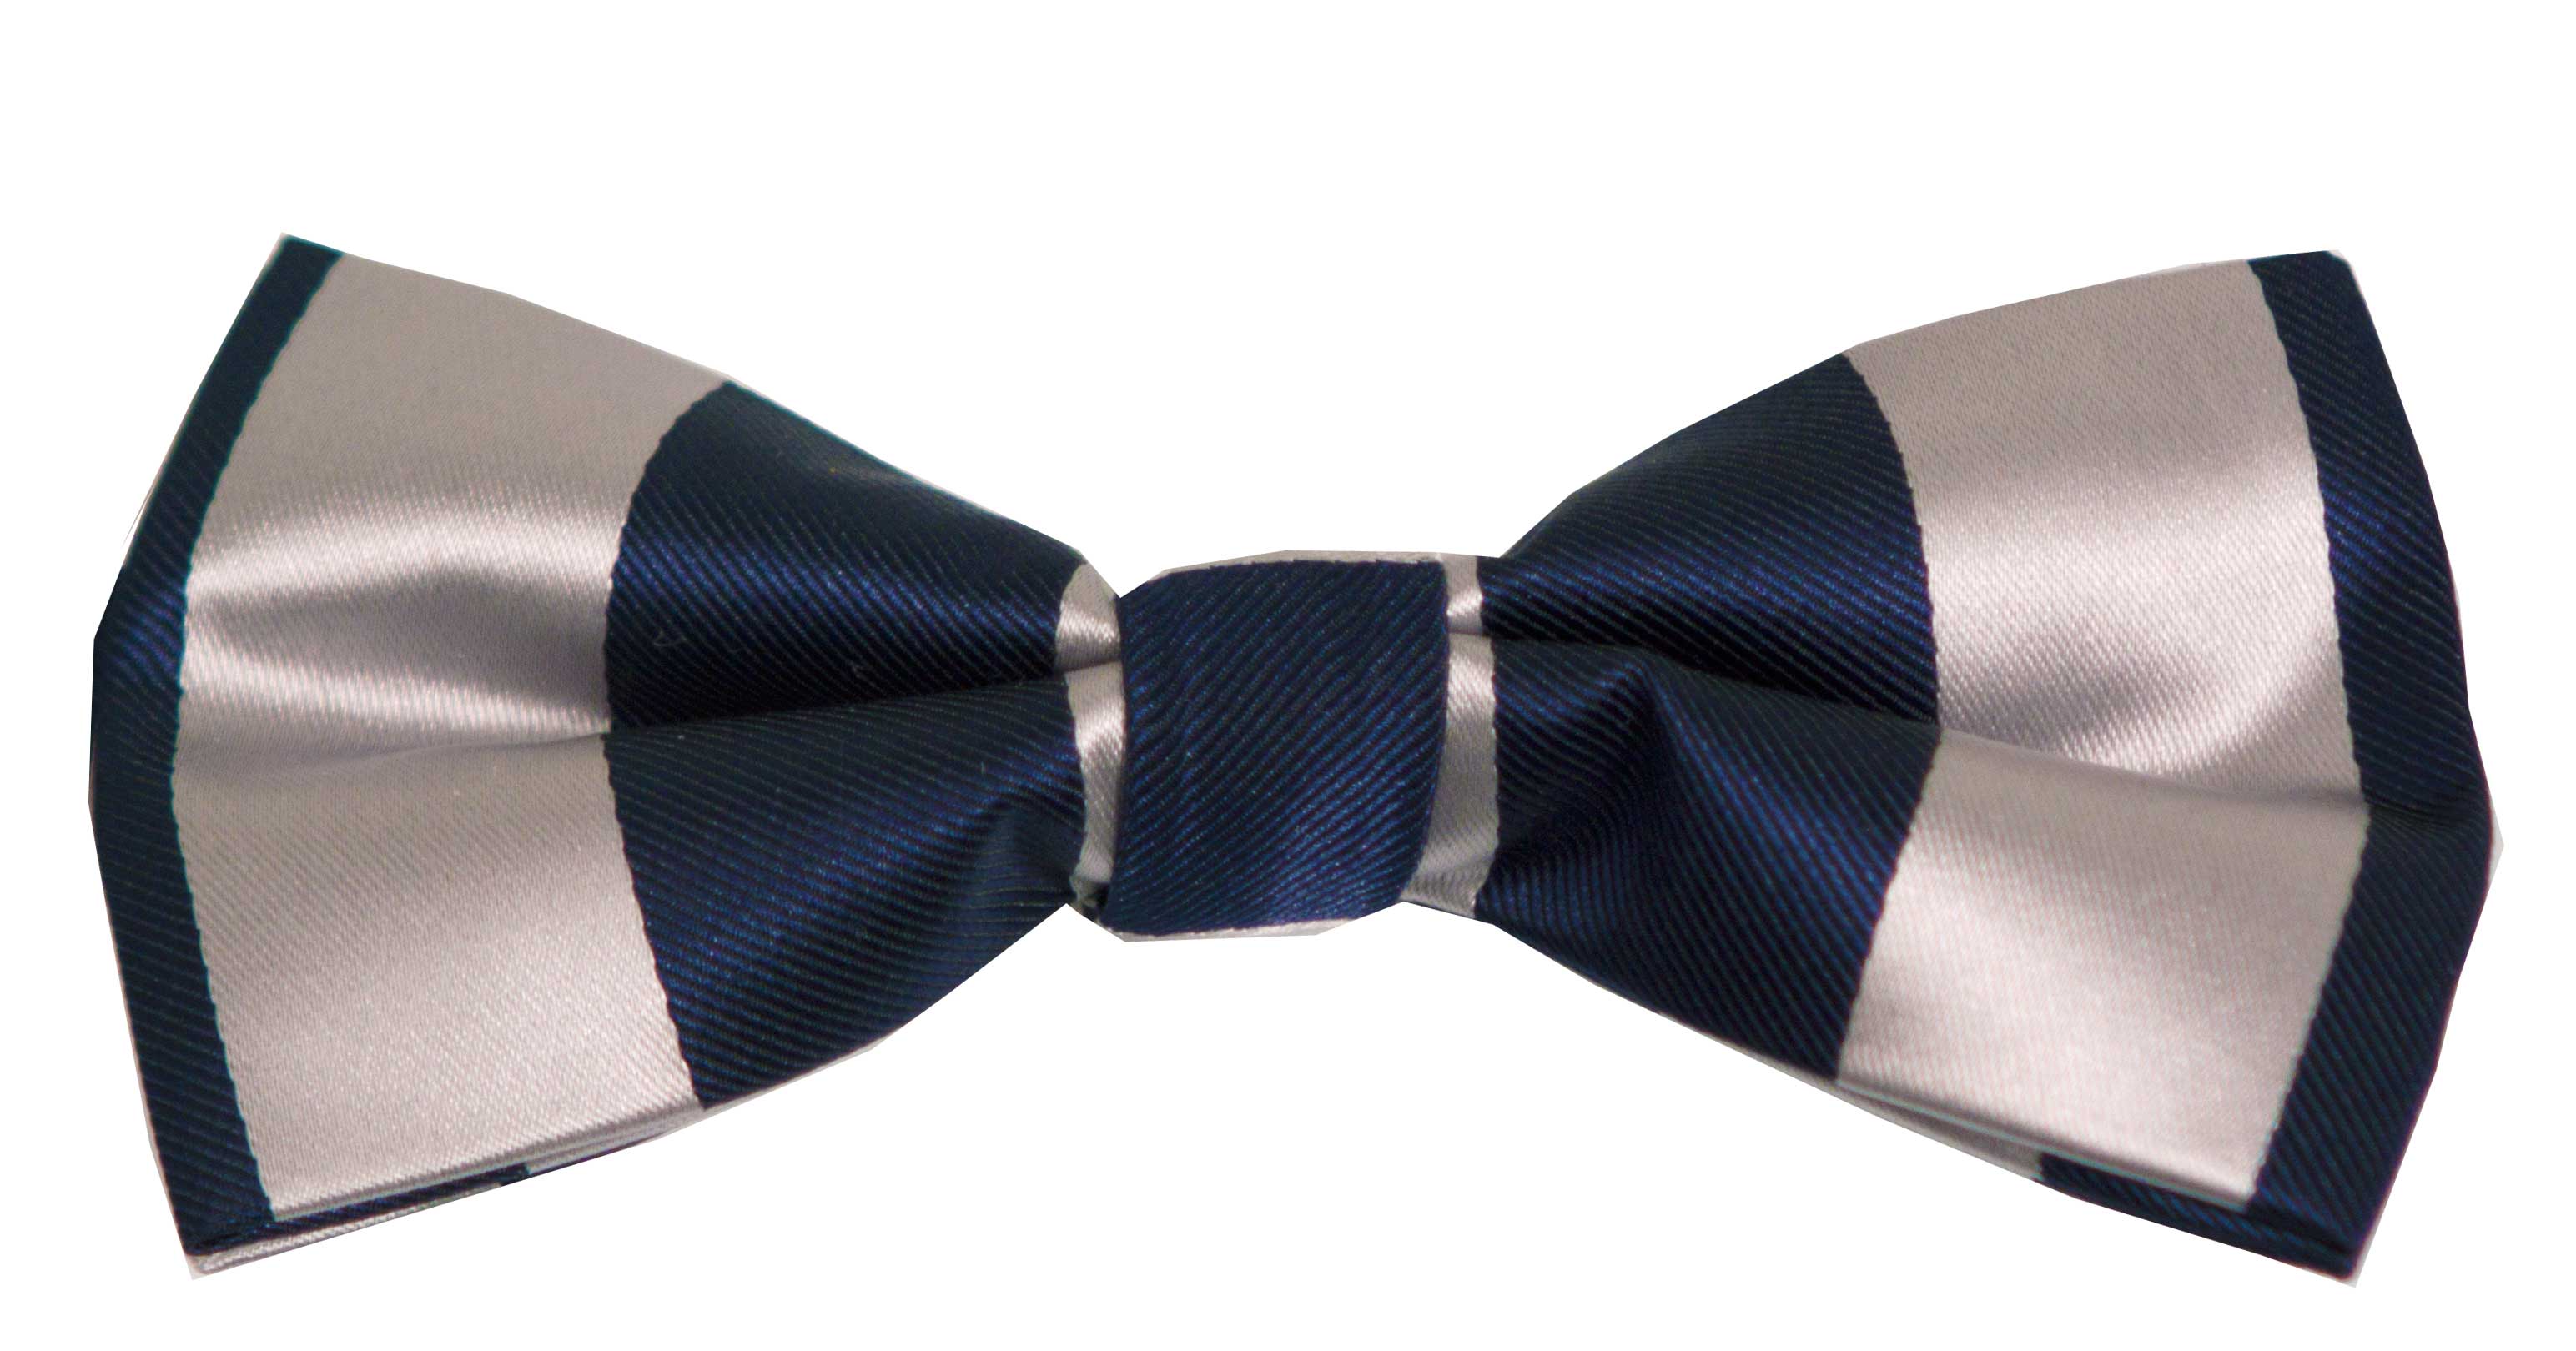 Bow tie (blue and grey)